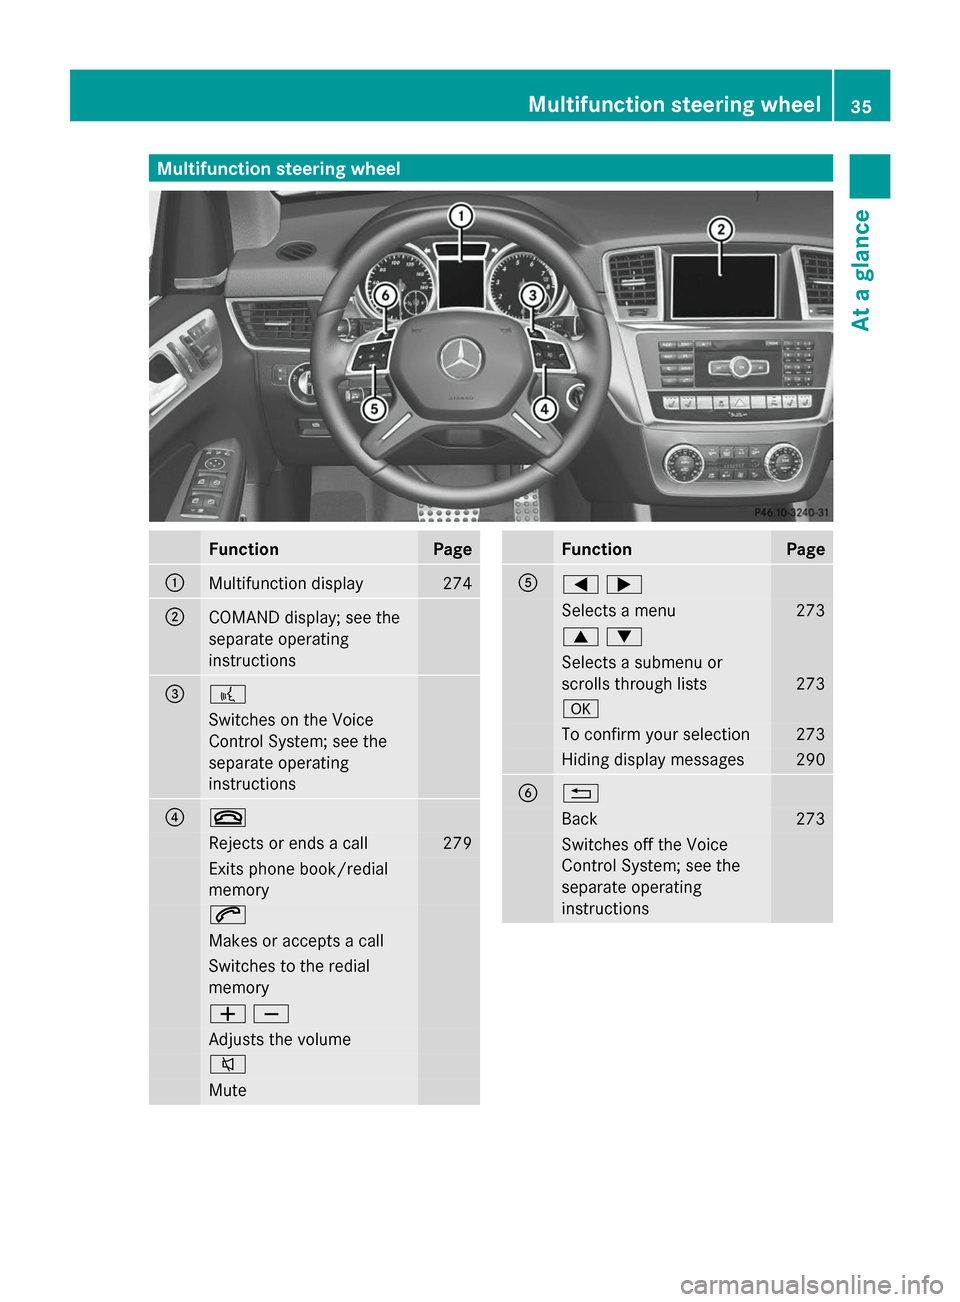 MERCEDES-BENZ GL-Class 2014 X166 Owners Manual Multifunction steering wheel
Function Page
:
Multifunction display 274
;
COMAND display; see the
separate operating
instructions
=
?
Switches on the Voice
Control System; see the
separate operating
in